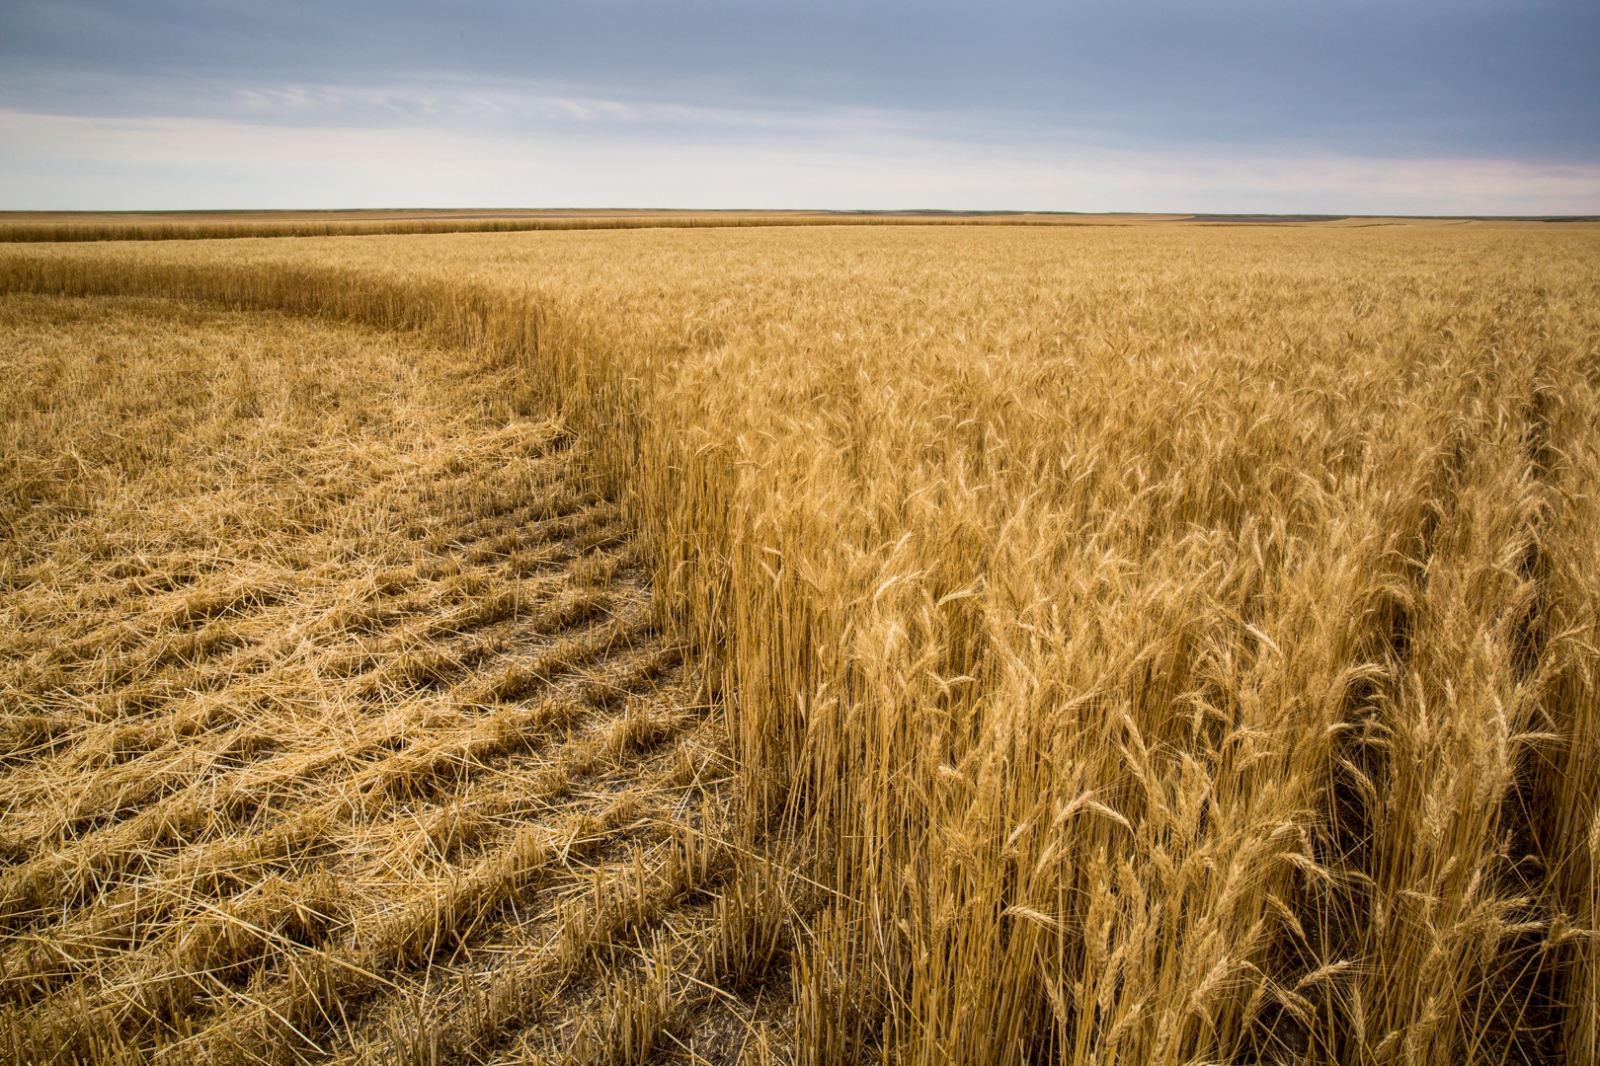 Harvesters -  A partially cut field of wheat is threatened by looming...